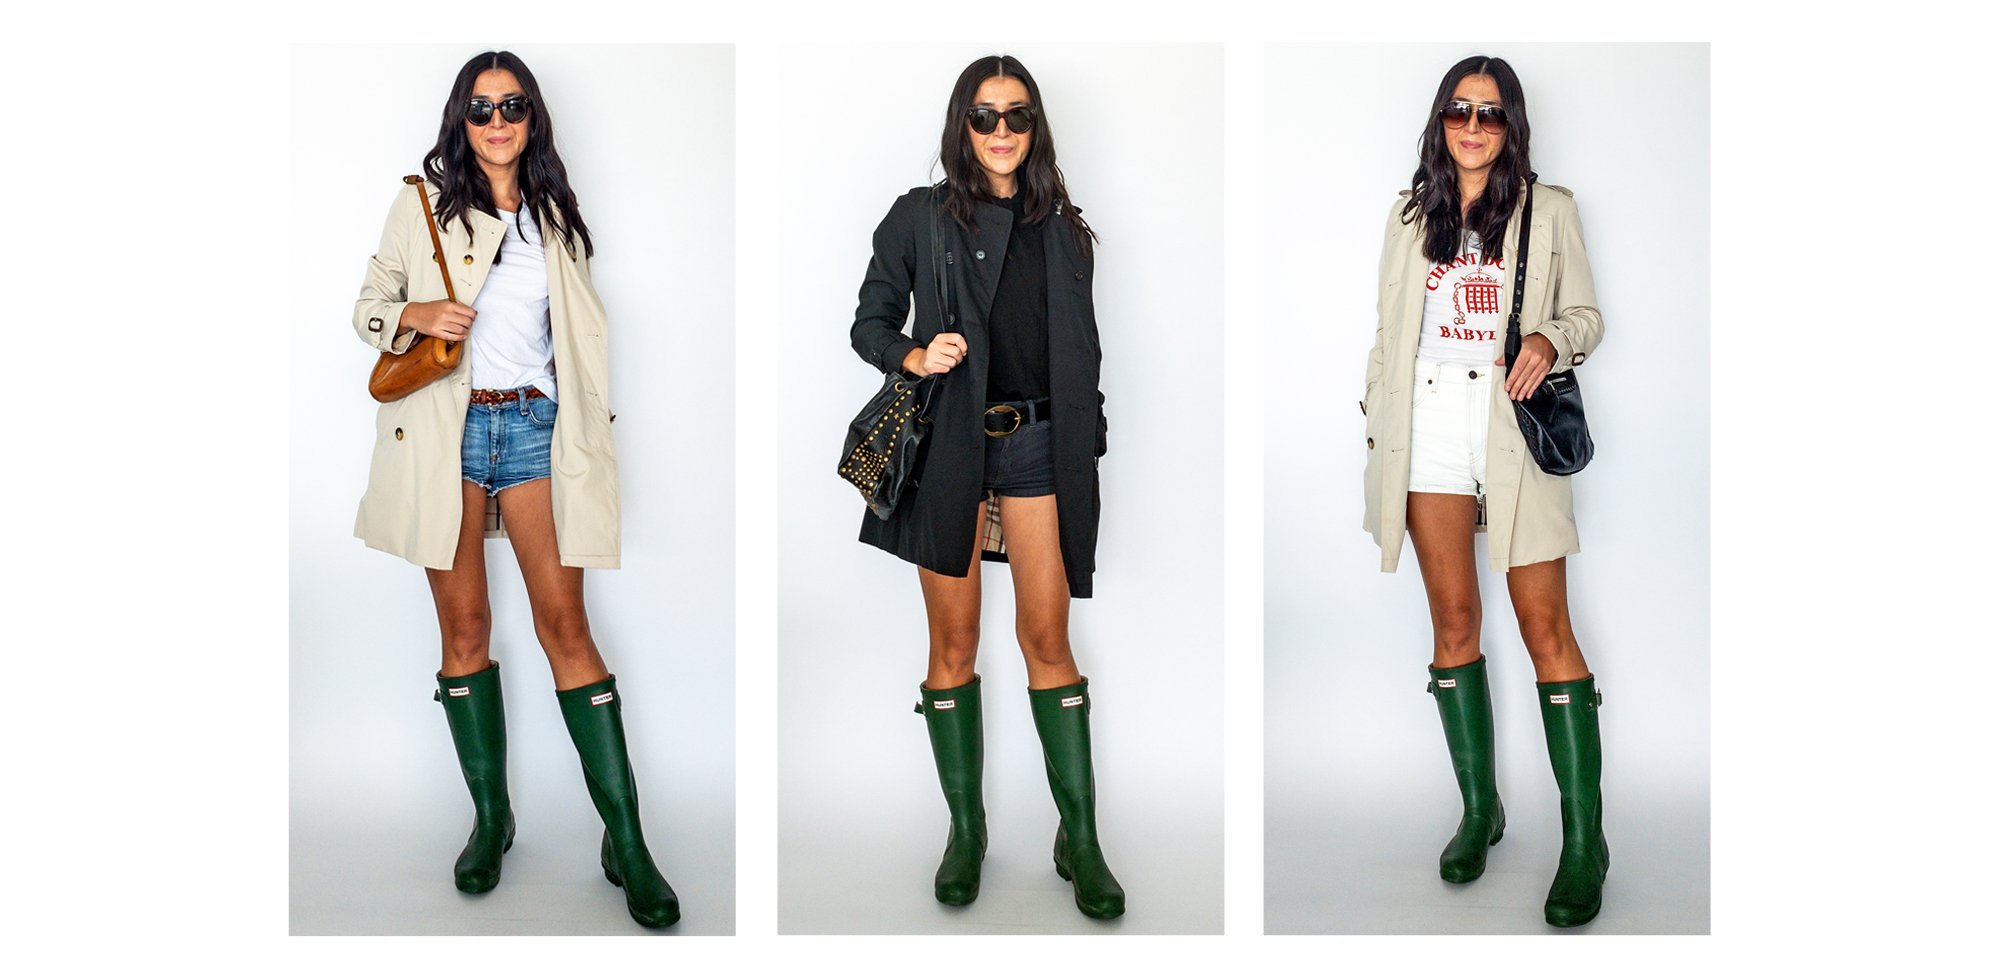 How to wear rain boots with shorts